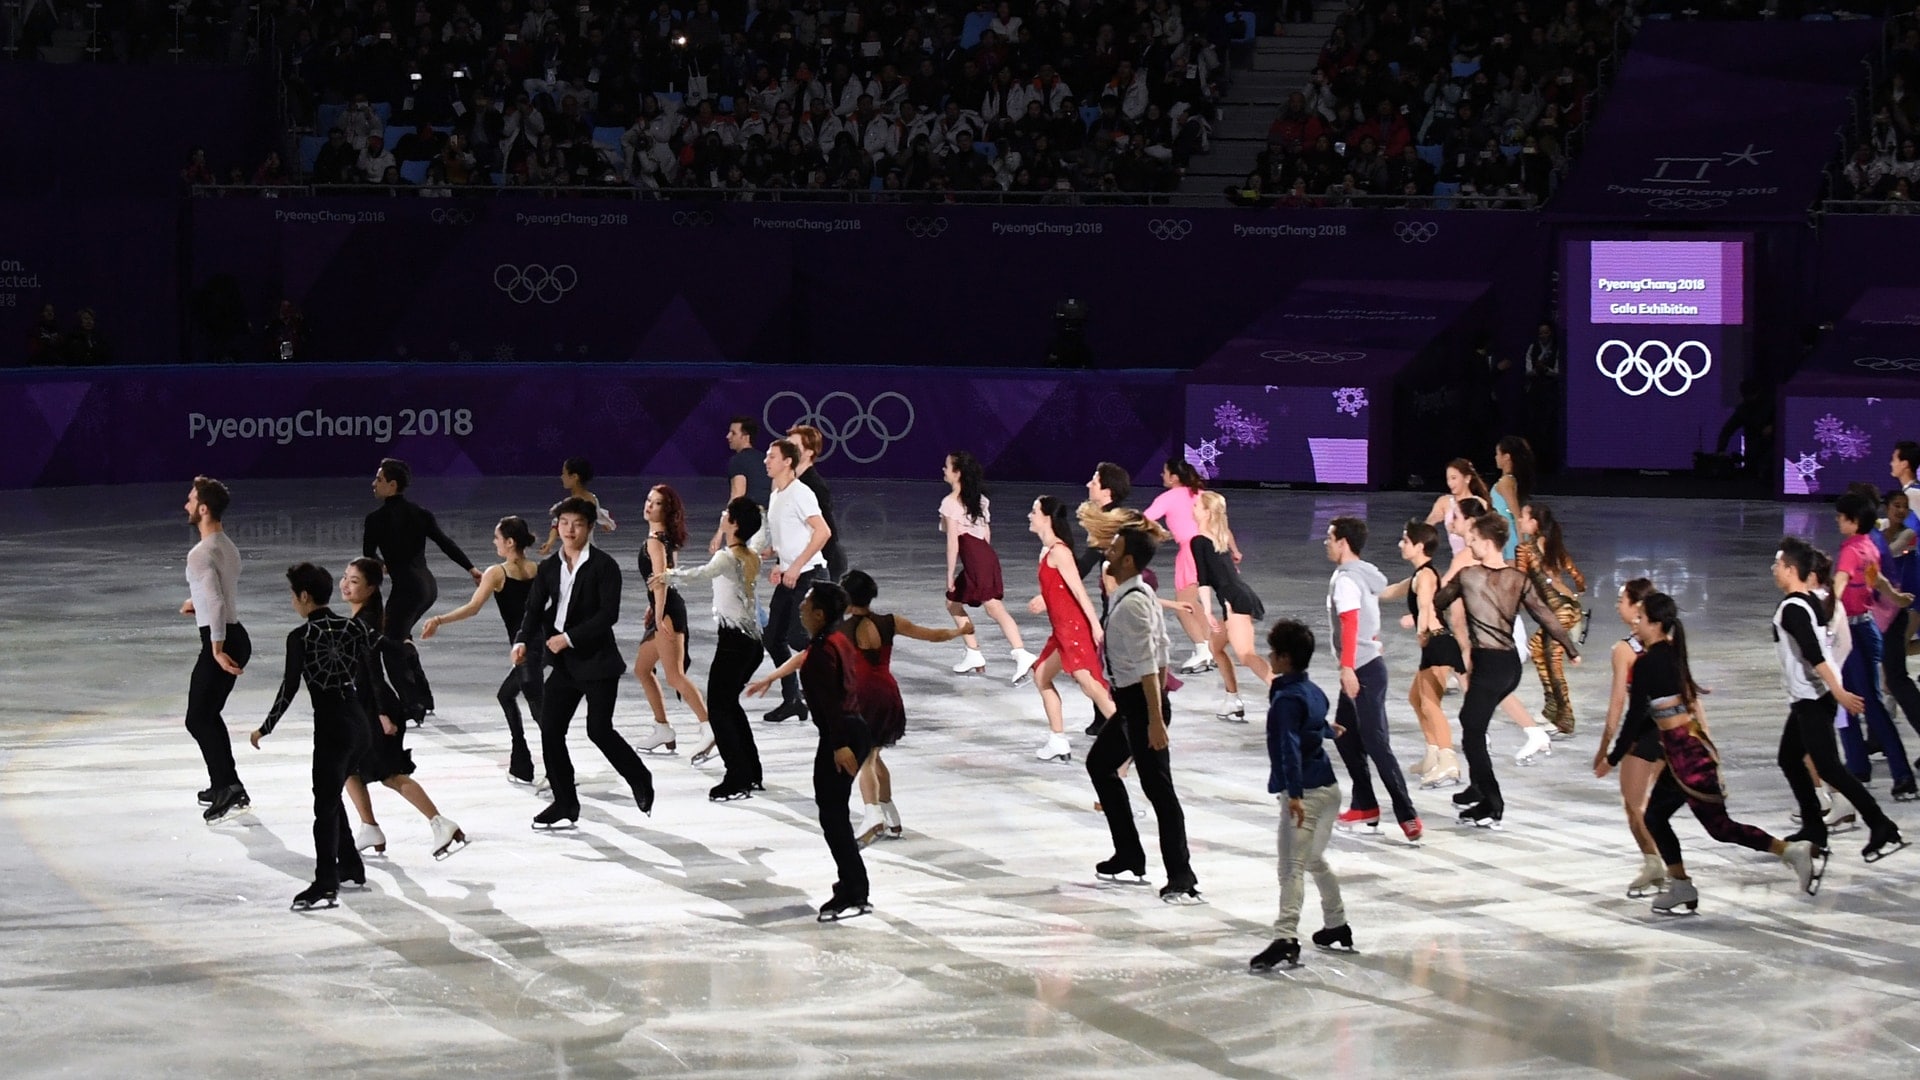 When is the Olympic figure skating gala and who is skating?